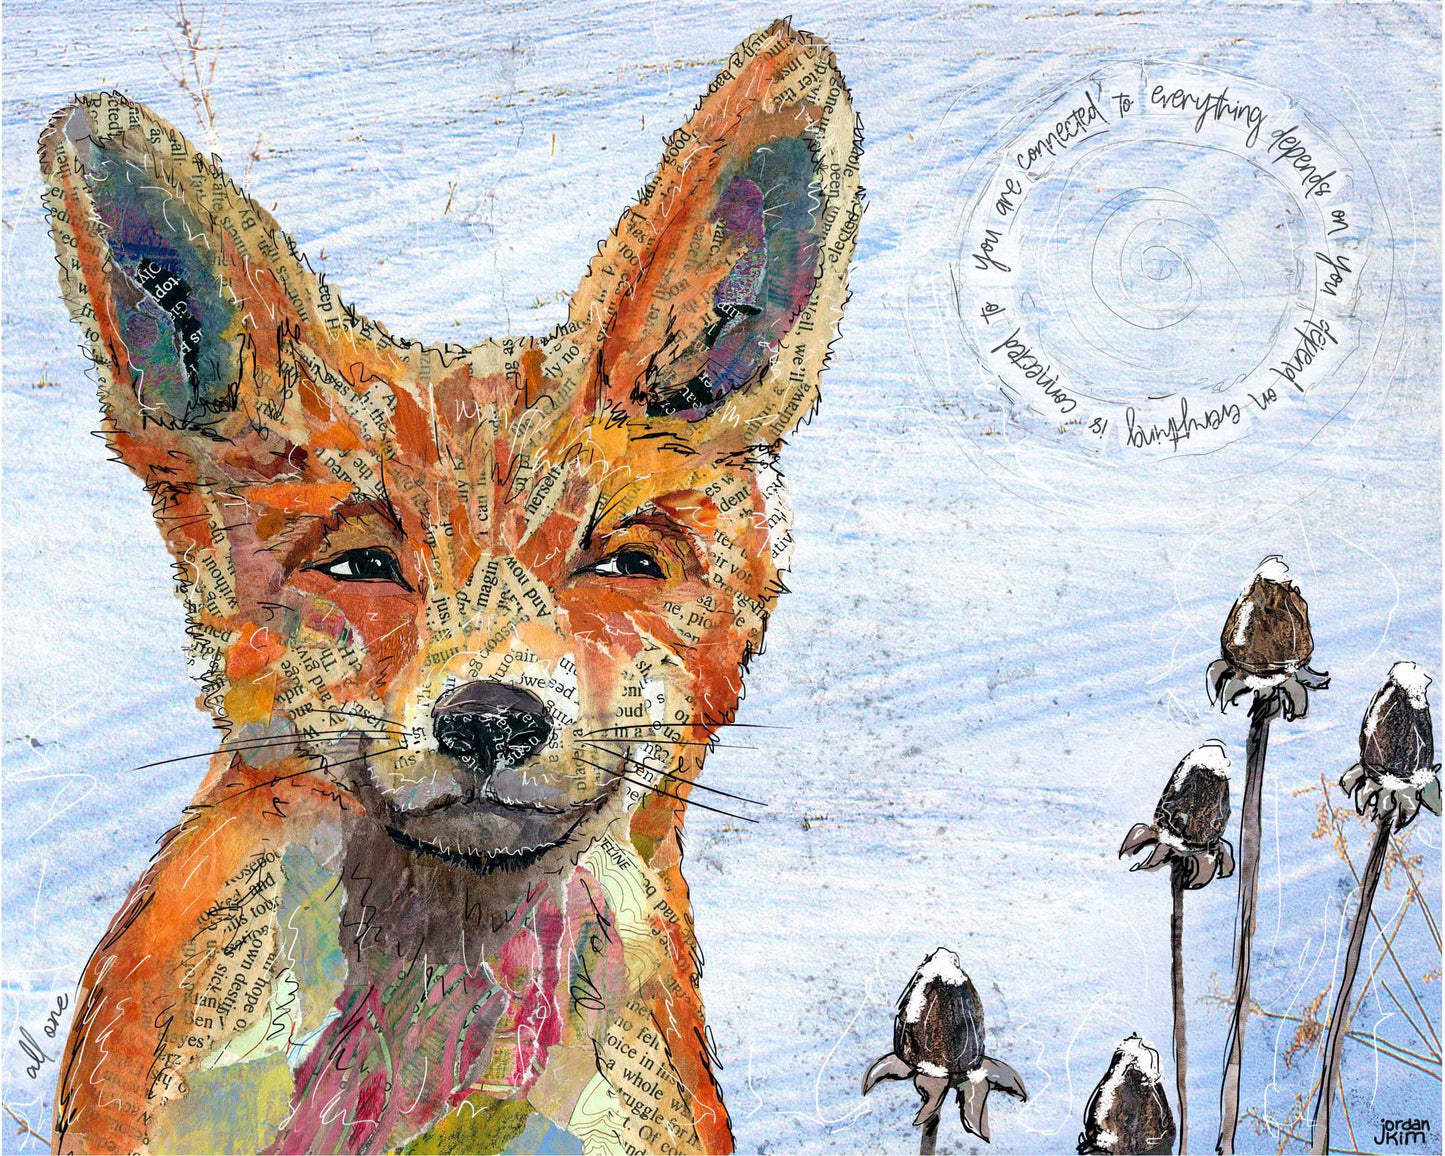 Greeting Card of a Paper Collage of a red fox in the snow - inspirational - Blank Inside